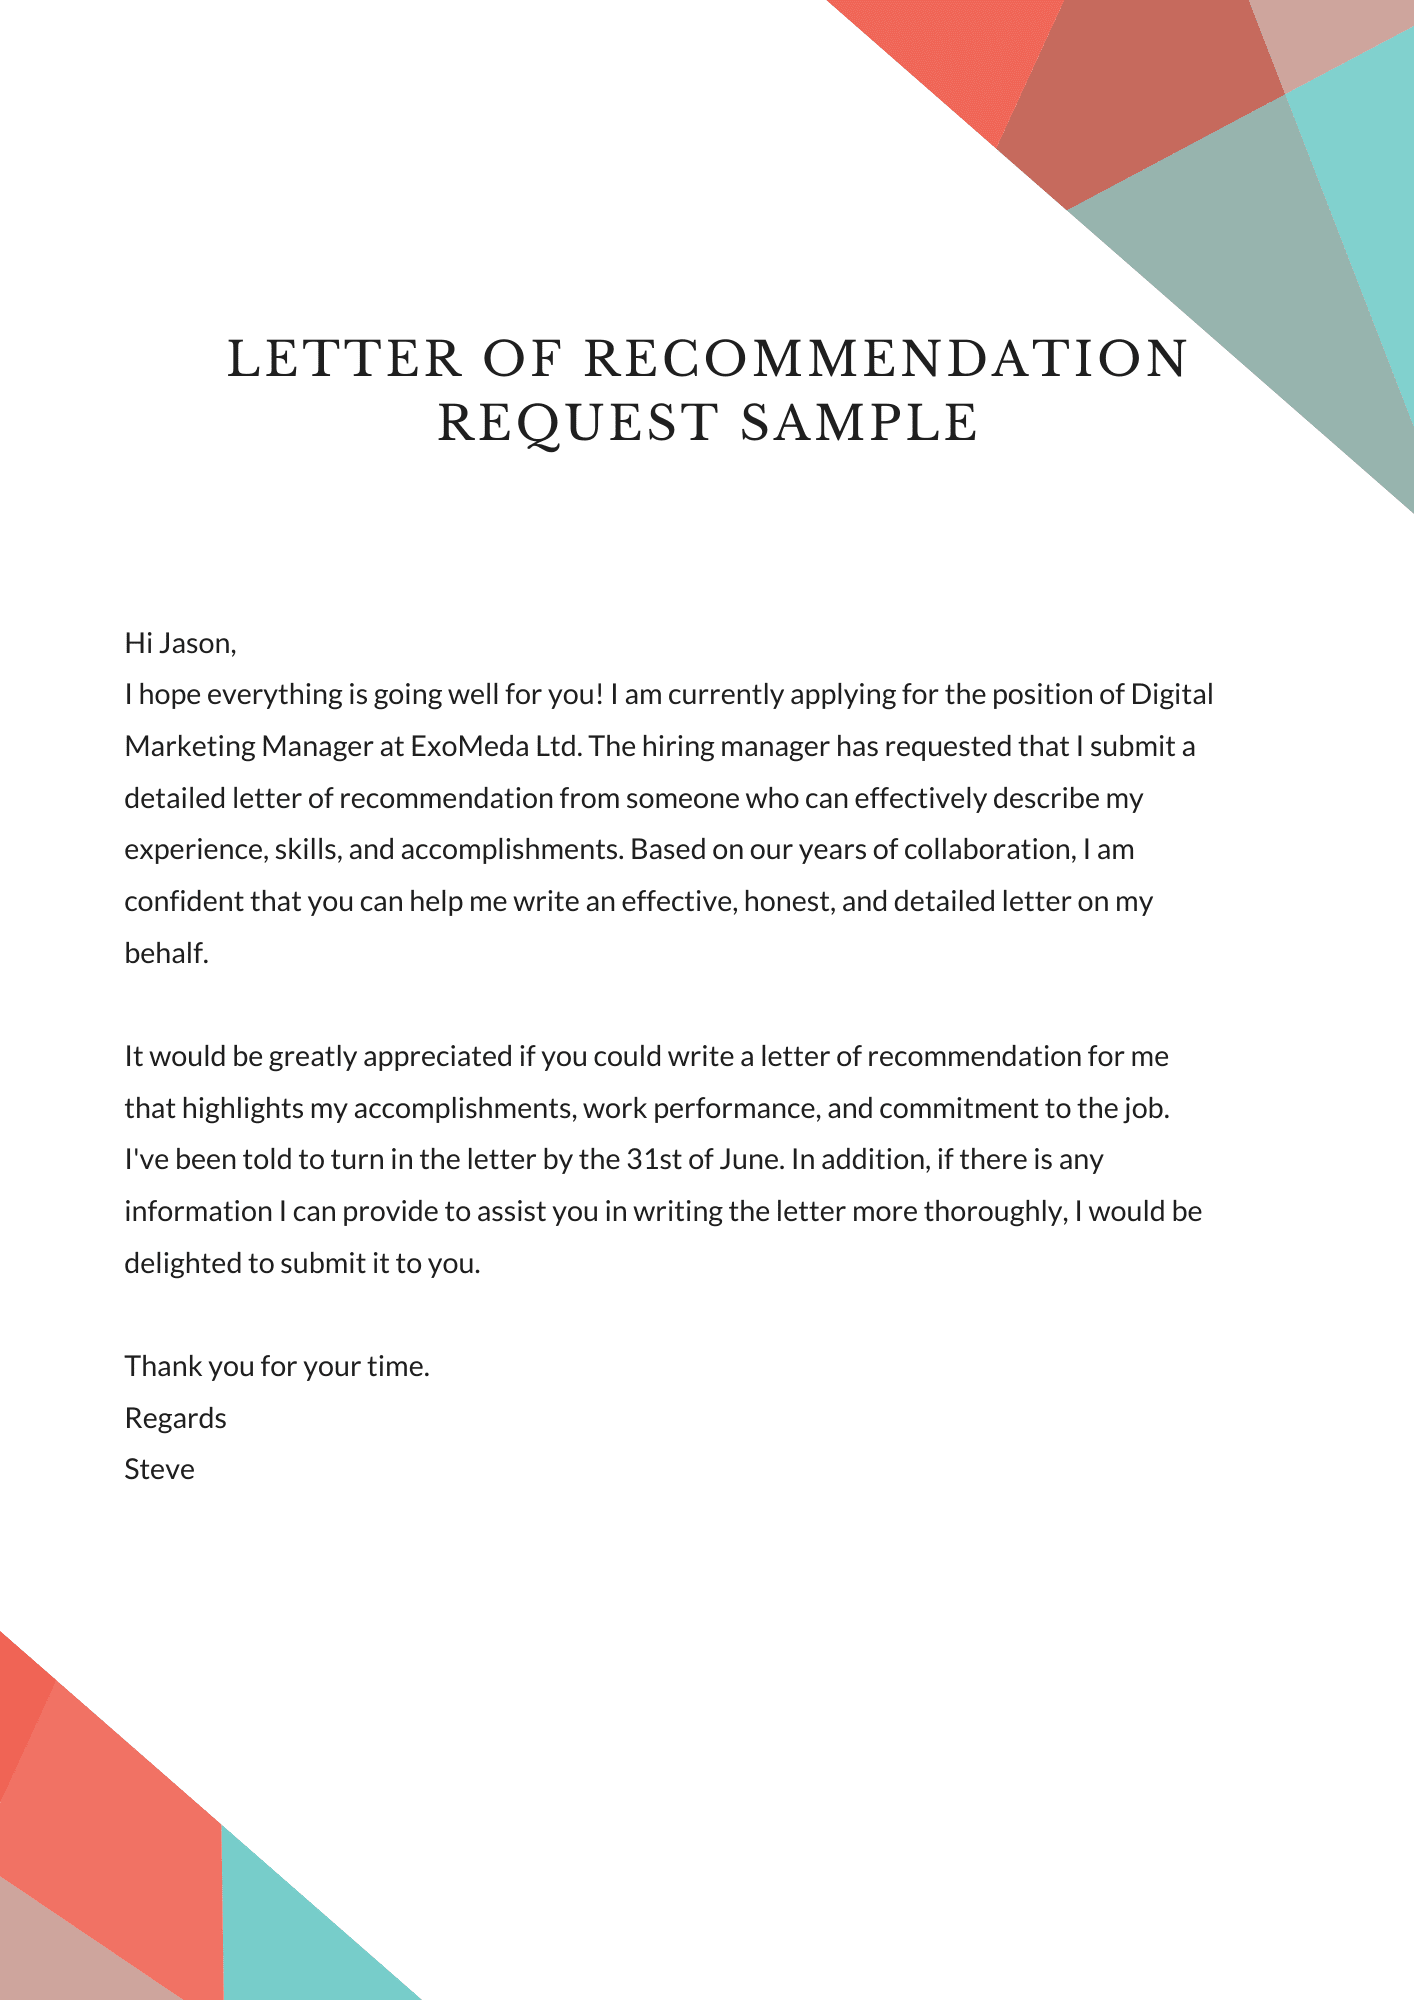 How To Write A Letter Of Recommendation For Medical Student